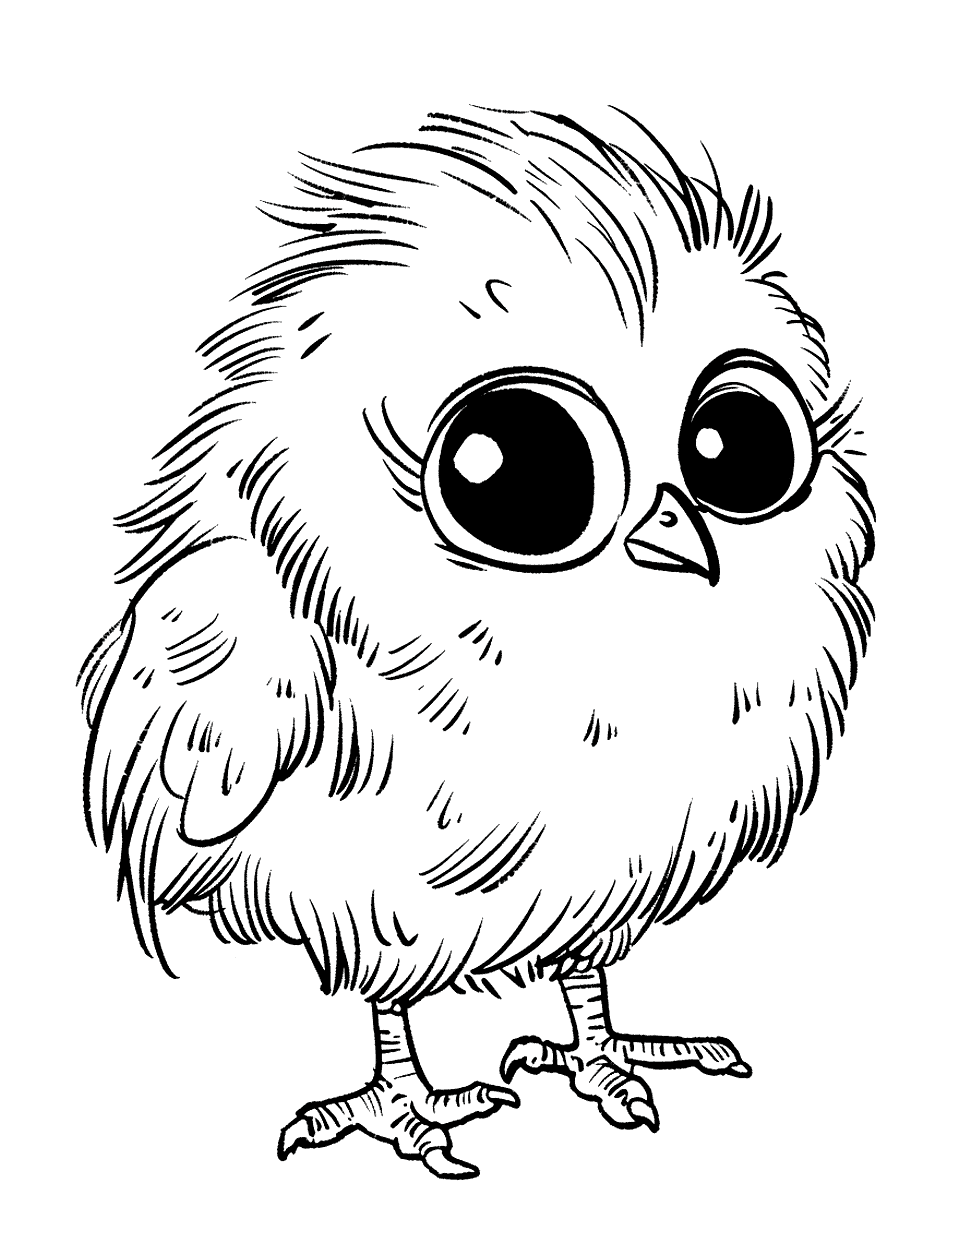 Fluffy Chick with Big Eyes Chicken Coloring Page - A fluffy chick with exaggeratedly big, cute eyes, looking directly at the viewer.